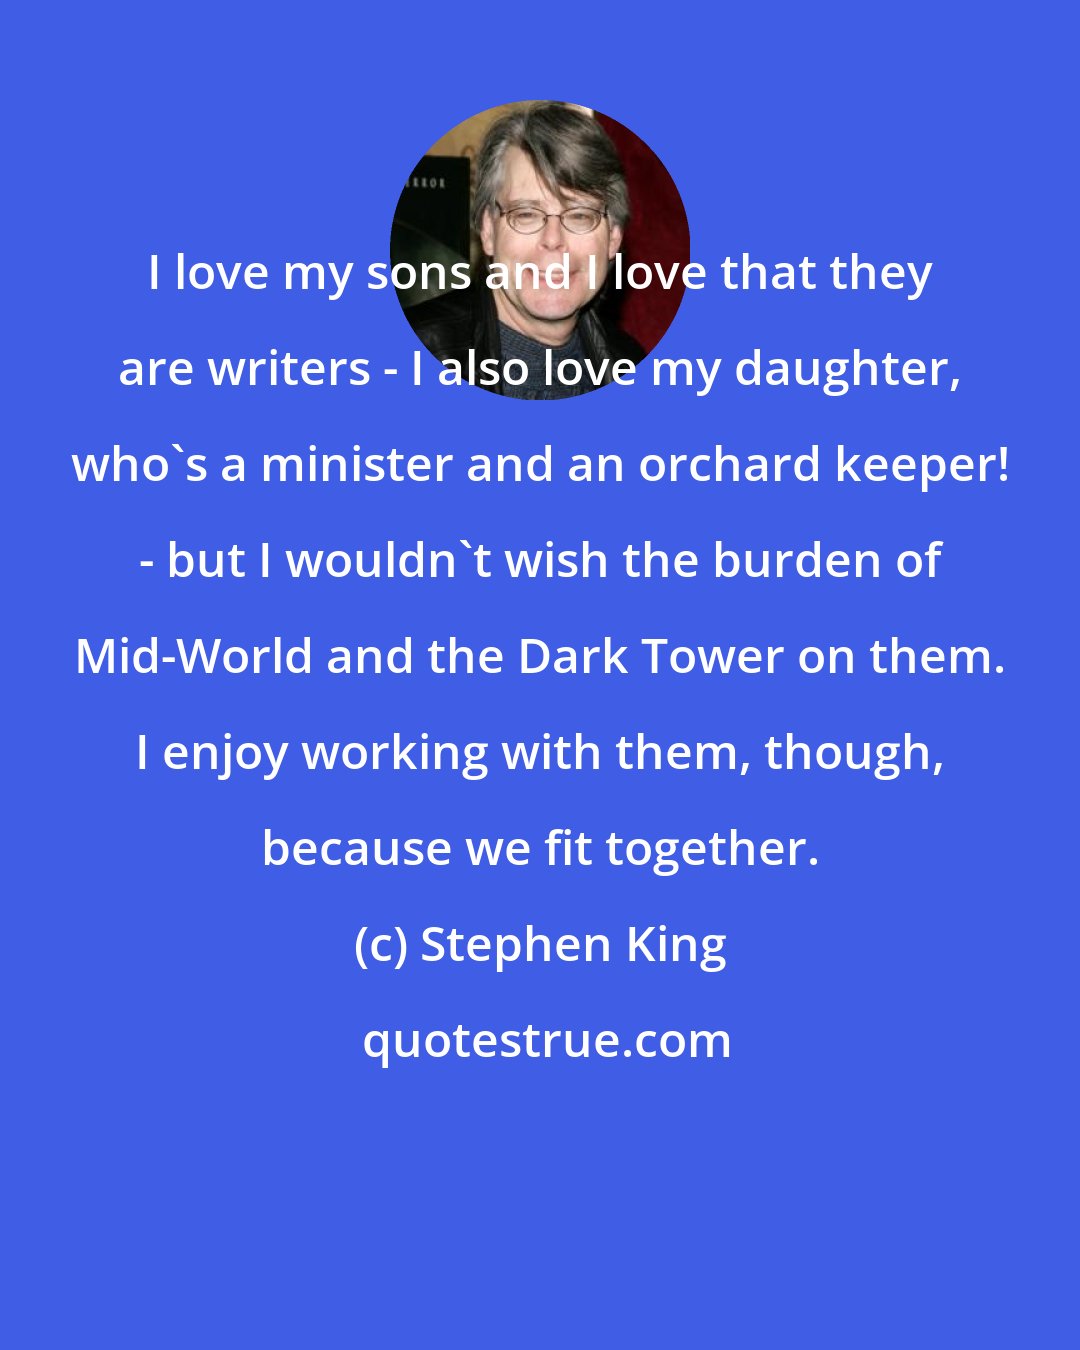 Stephen King: I love my sons and I love that they are writers - I also love my daughter, who's a minister and an orchard keeper! - but I wouldn't wish the burden of Mid-World and the Dark Tower on them. I enjoy working with them, though, because we fit together.